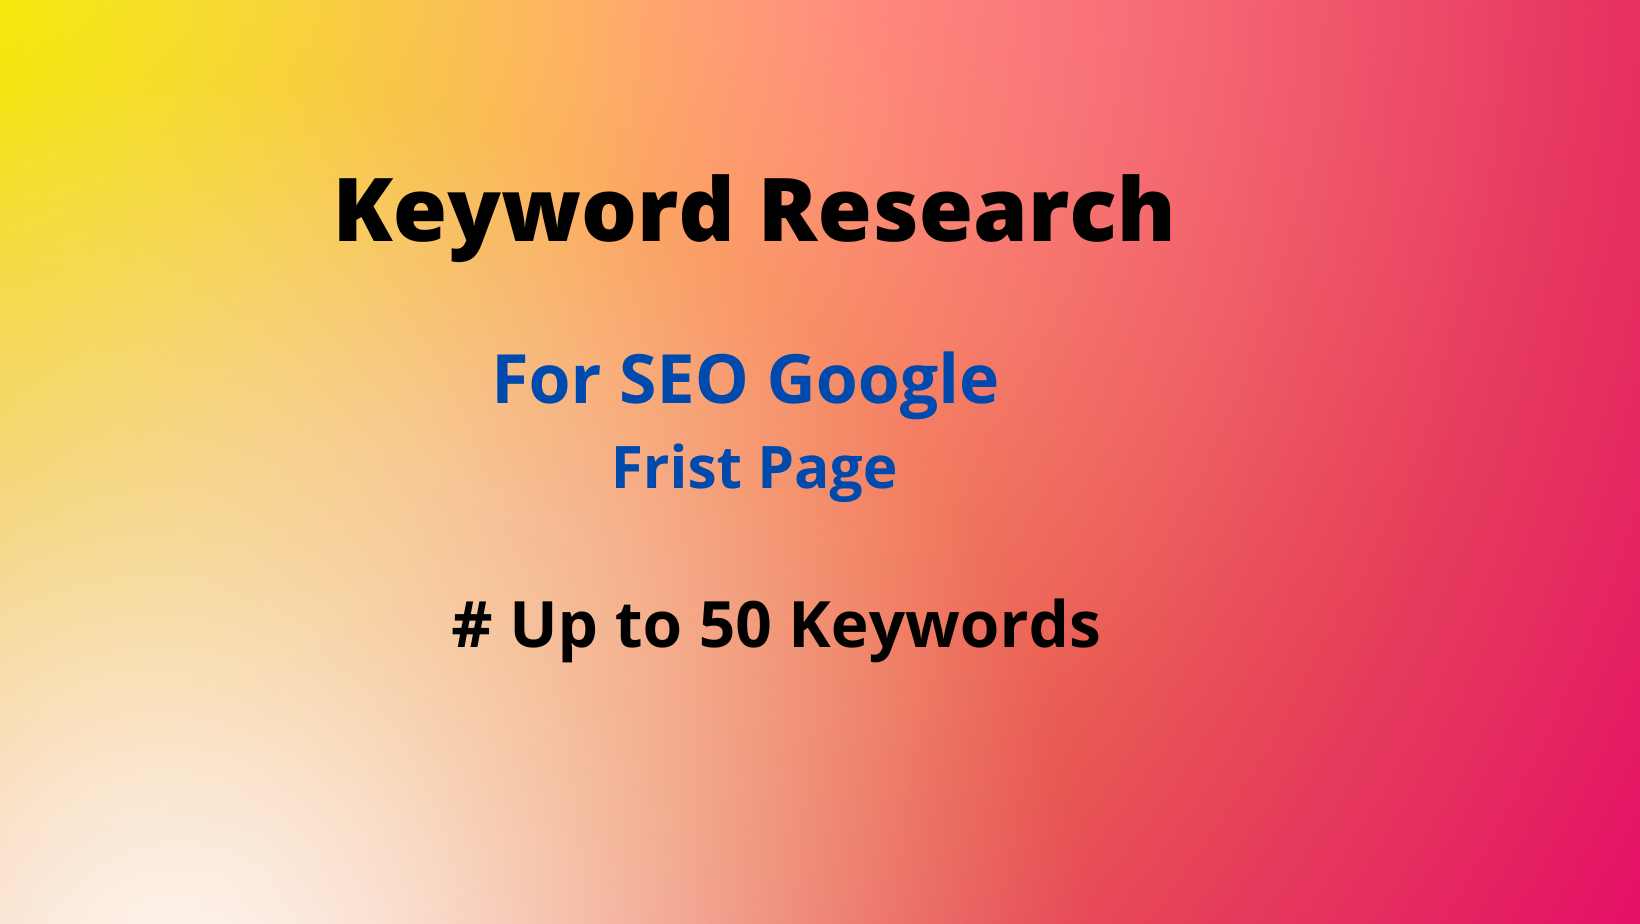 I will perform keyword research for SEO Google Rank